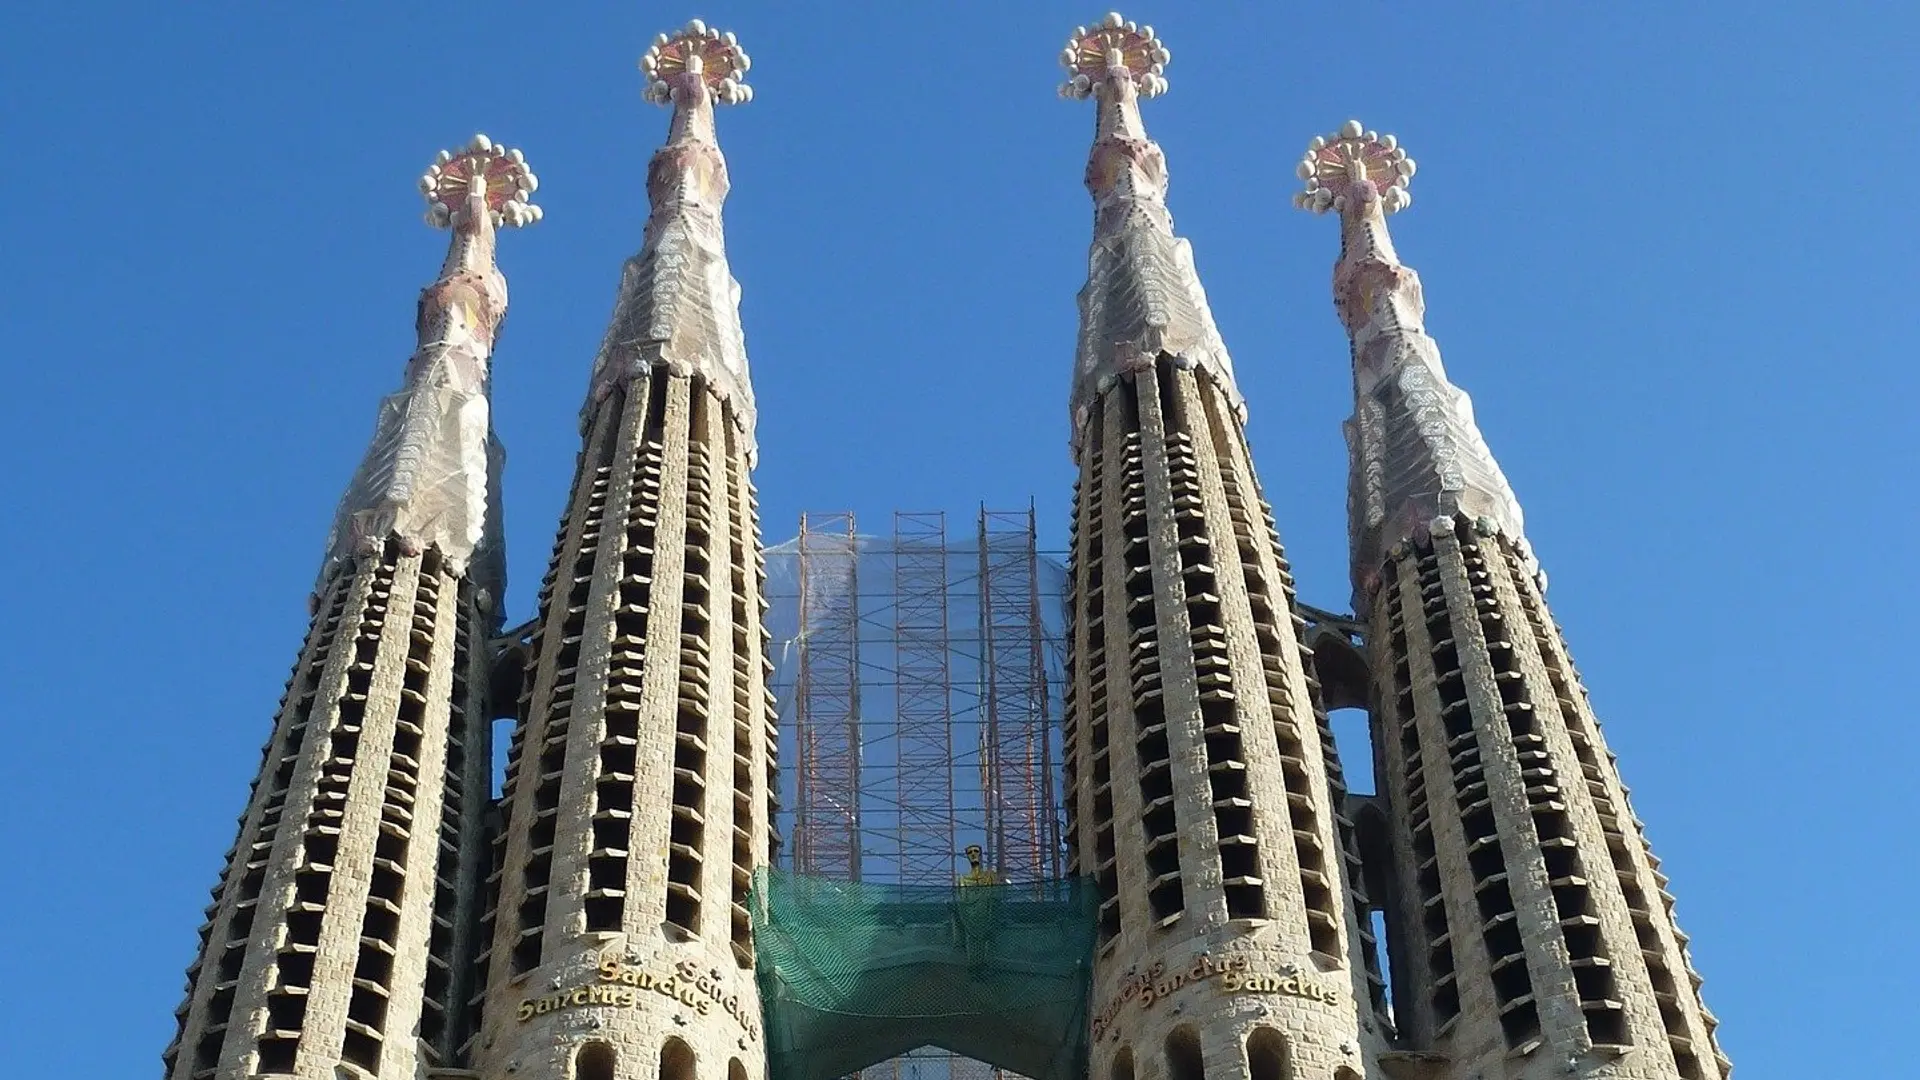 Four spires that scrape the skies in Barcelona.